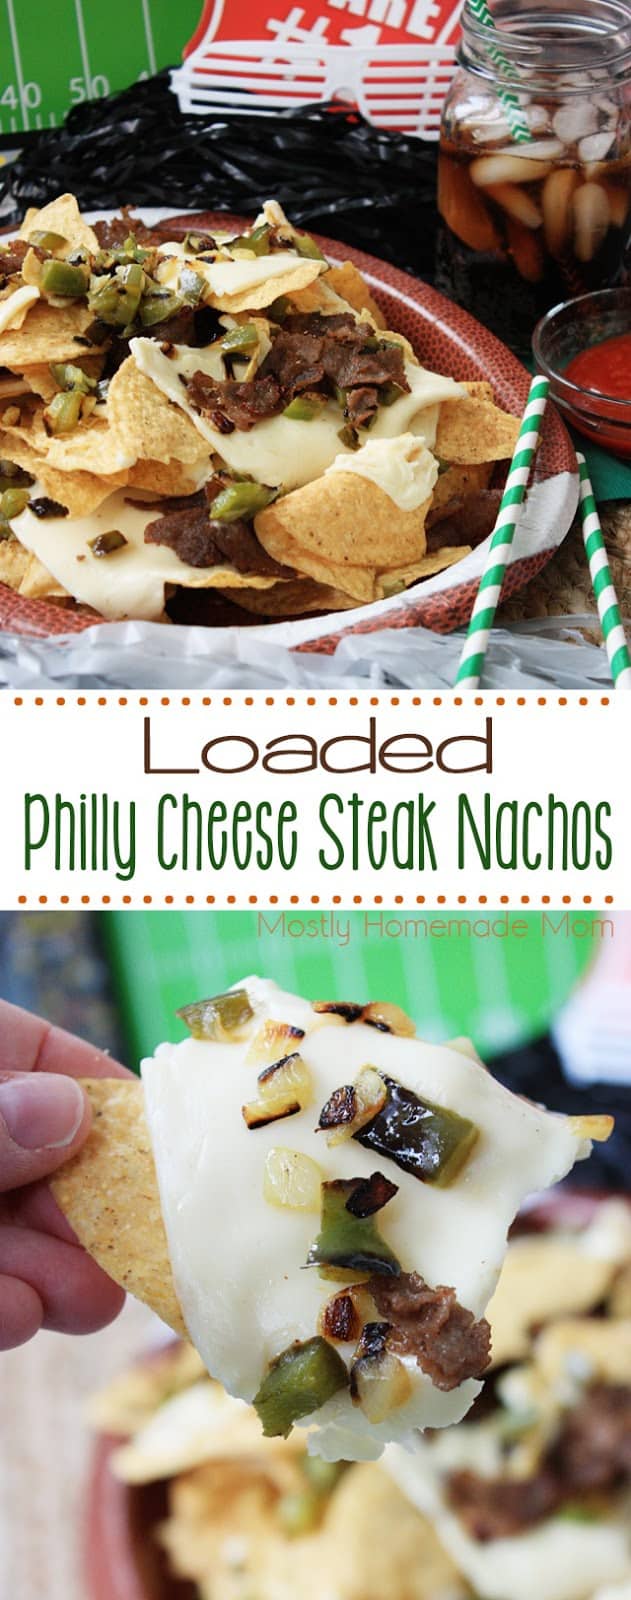 Loaded Philly Cheese Steak Nachos - Mostly Homemade Mom